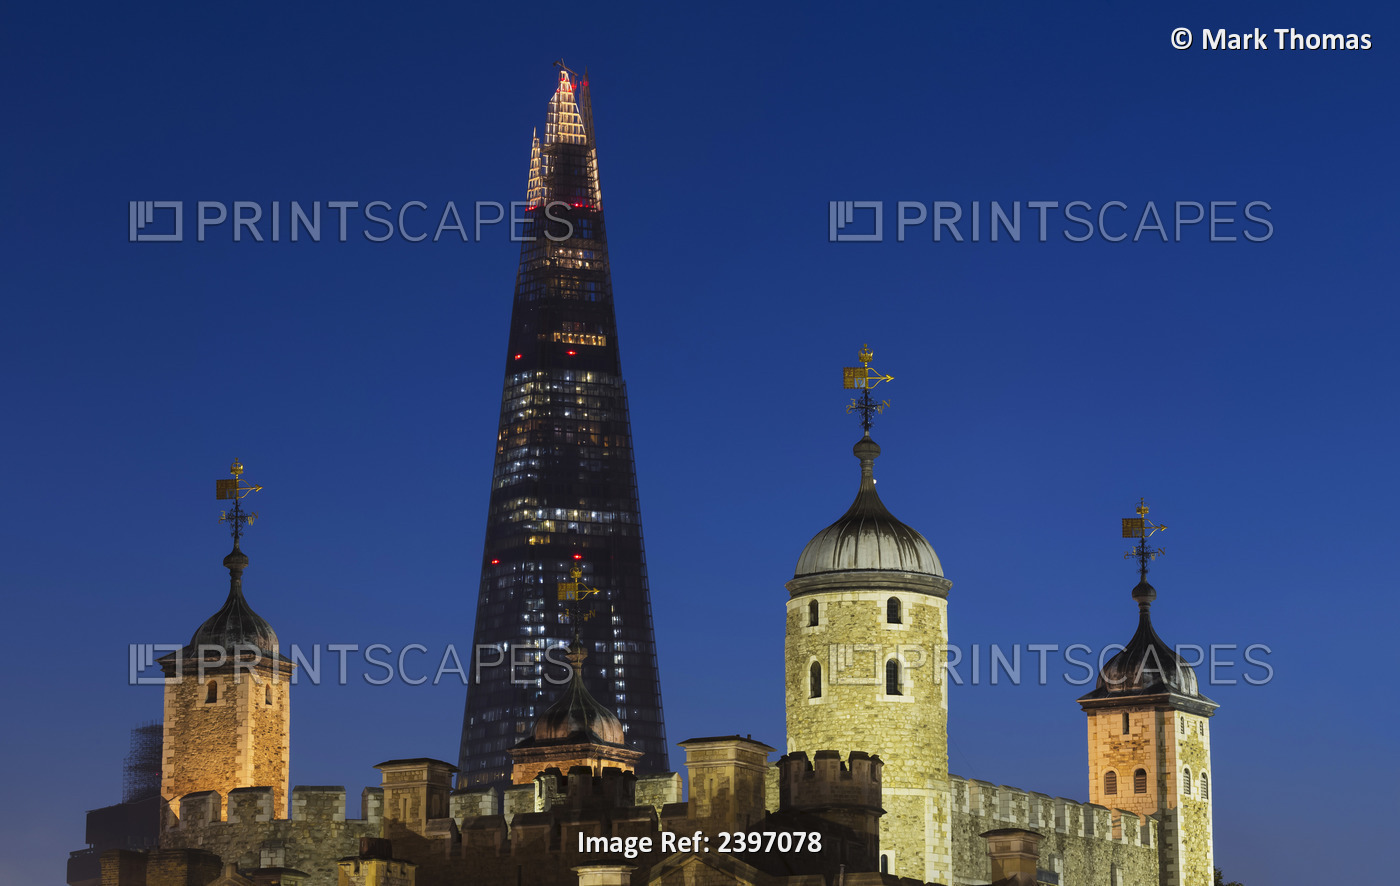 The Shard Skyscraper And The Tower Of London At Dusk; London, England